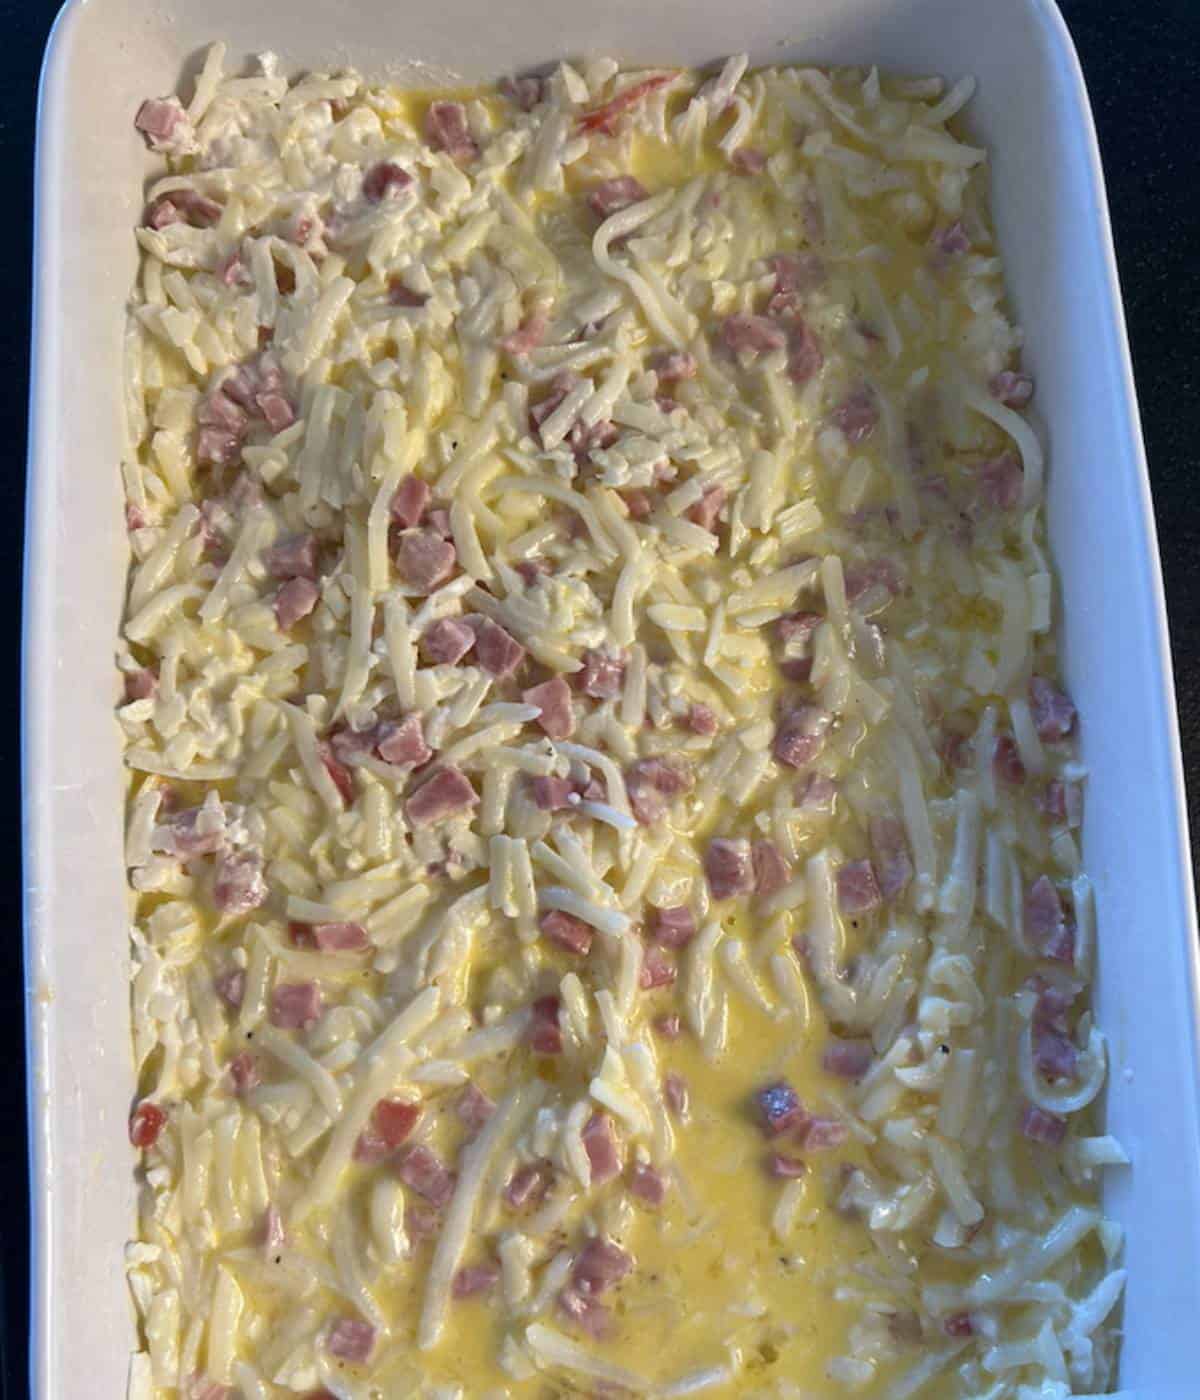 Ham Casserole with Eggs poured over top.